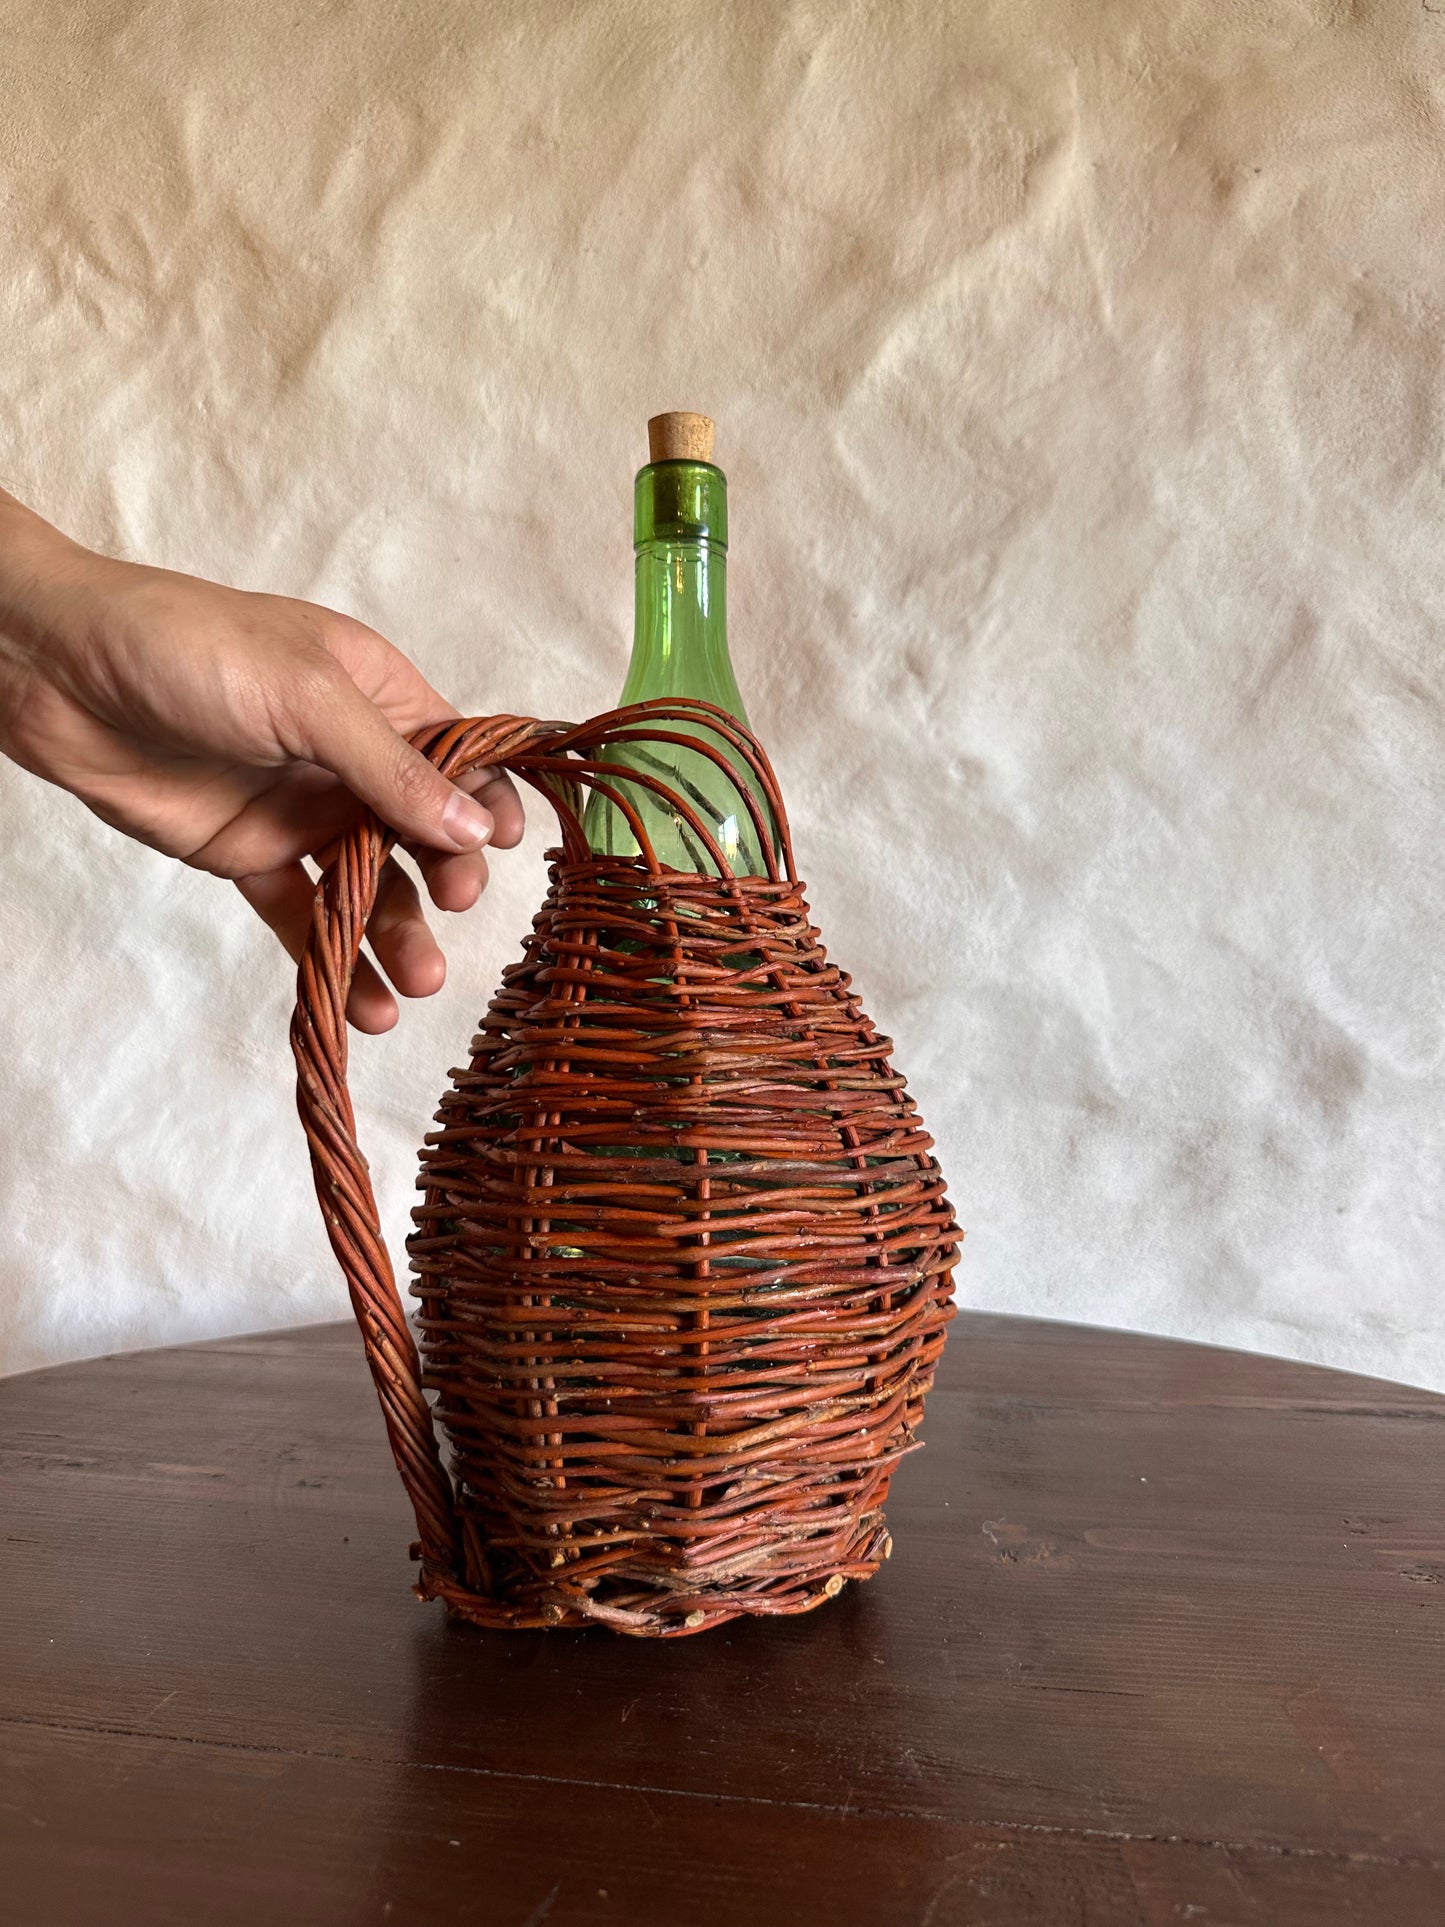 Willow Wrapped Wine Bottle